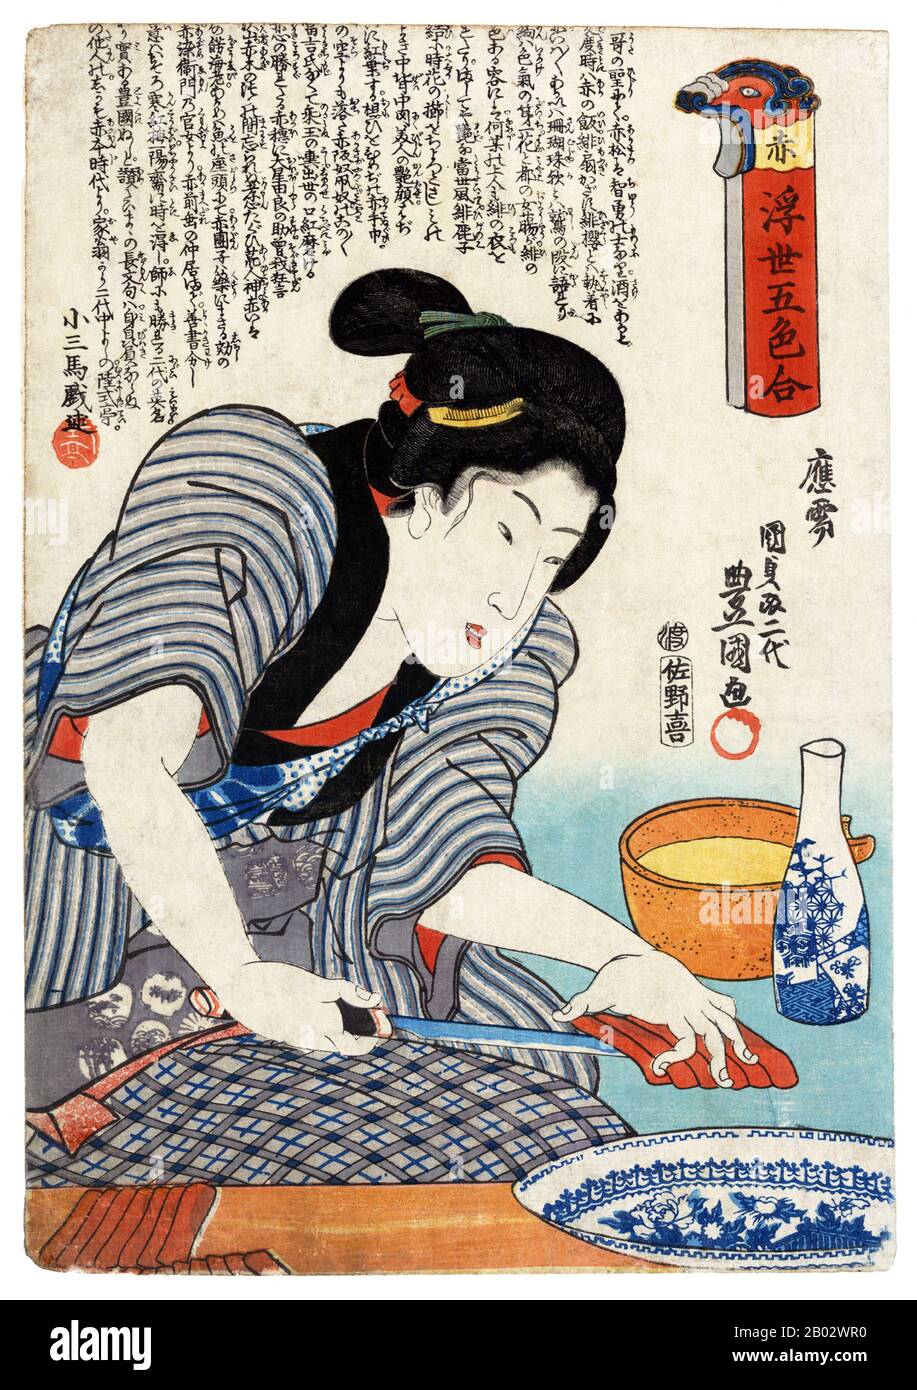 Utagawa Kunisada (1786 – January 12, 1865), also known as Utagawa Toyokuni III, was the most popular, prolific and financially successful designer of ukiyo-e woodblock prints in 19th-century Japan. In his own time, his reputation far exceeded that of his contemporaries, Hokusai, Hiroshige and Kuniyoshi.  Kunisada is renowned for his prints. His favourite subjects were pleasure-houses and tea ceremonies. These themes are sometimes found together in some of his prints, as geishas usually acted as chaperones at tea-houses. Notable among his book prints are shunga pictures, which appeared in numer Stock Photo